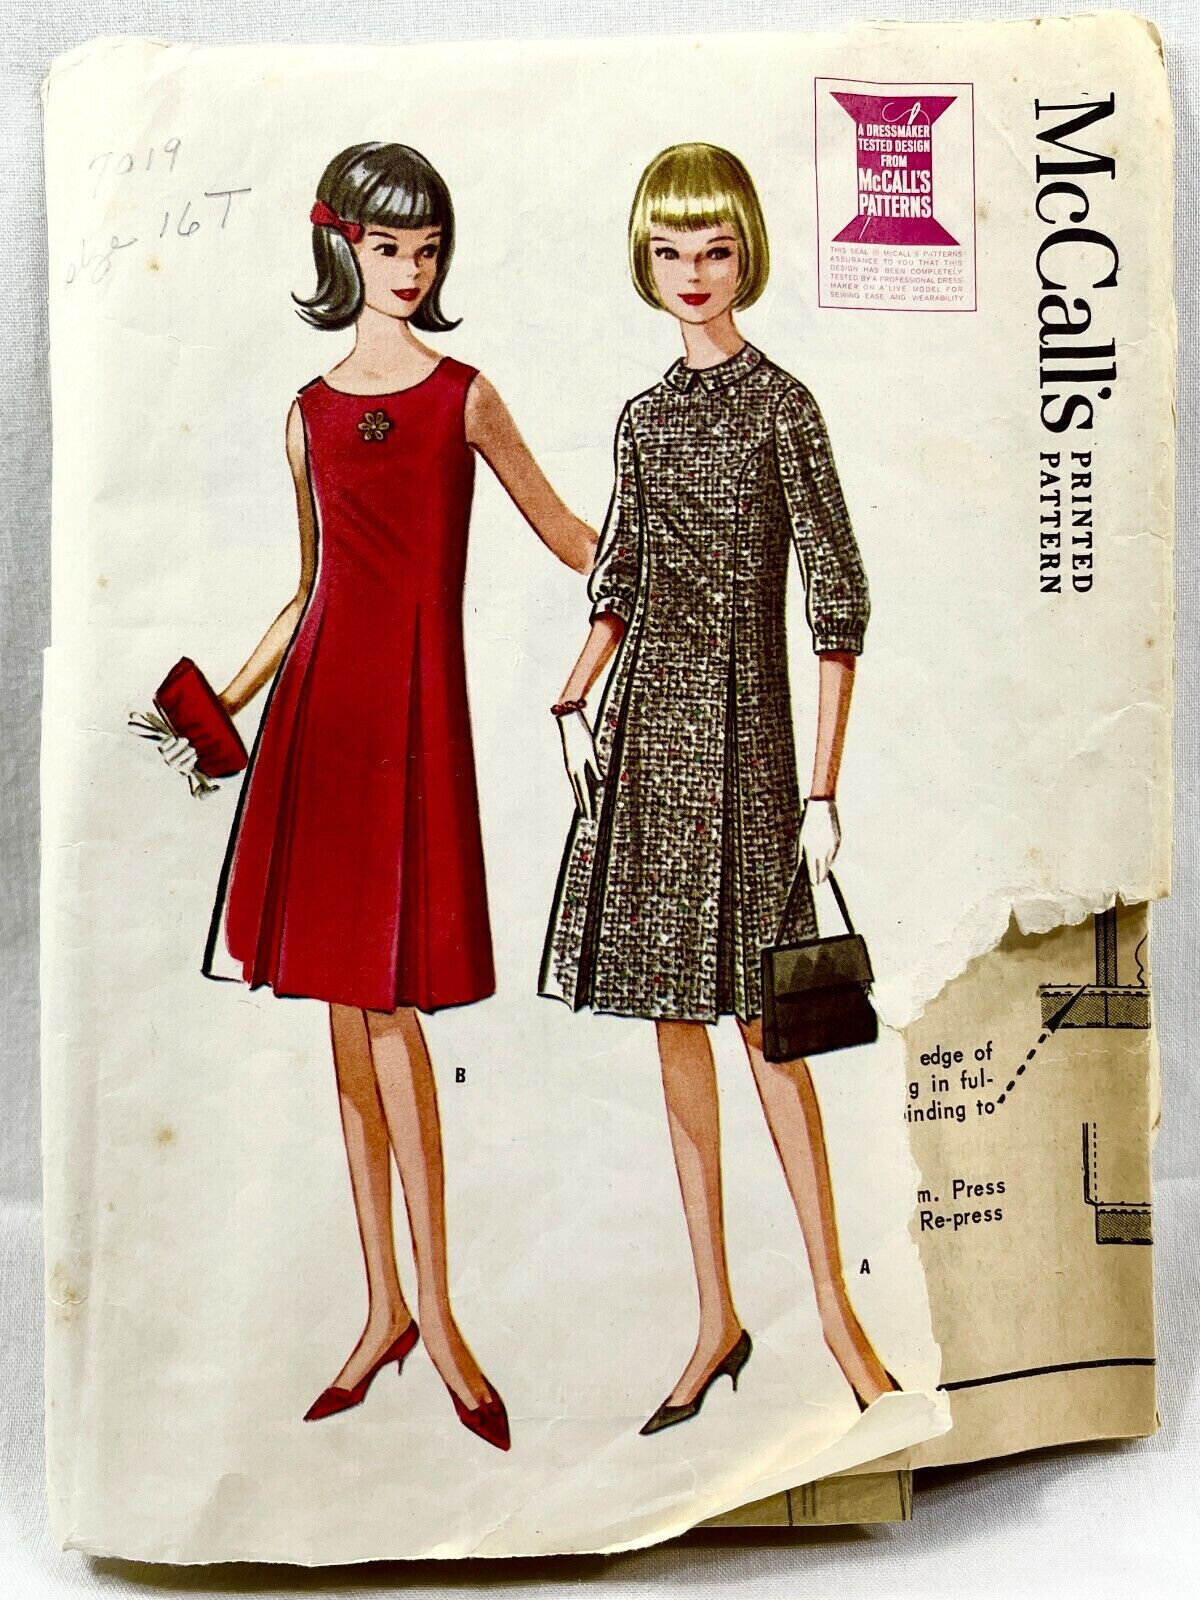 1963 McCalls Sewing Pattern 7019 Teens Dress 2 Styles Size 16T Vintage 10955